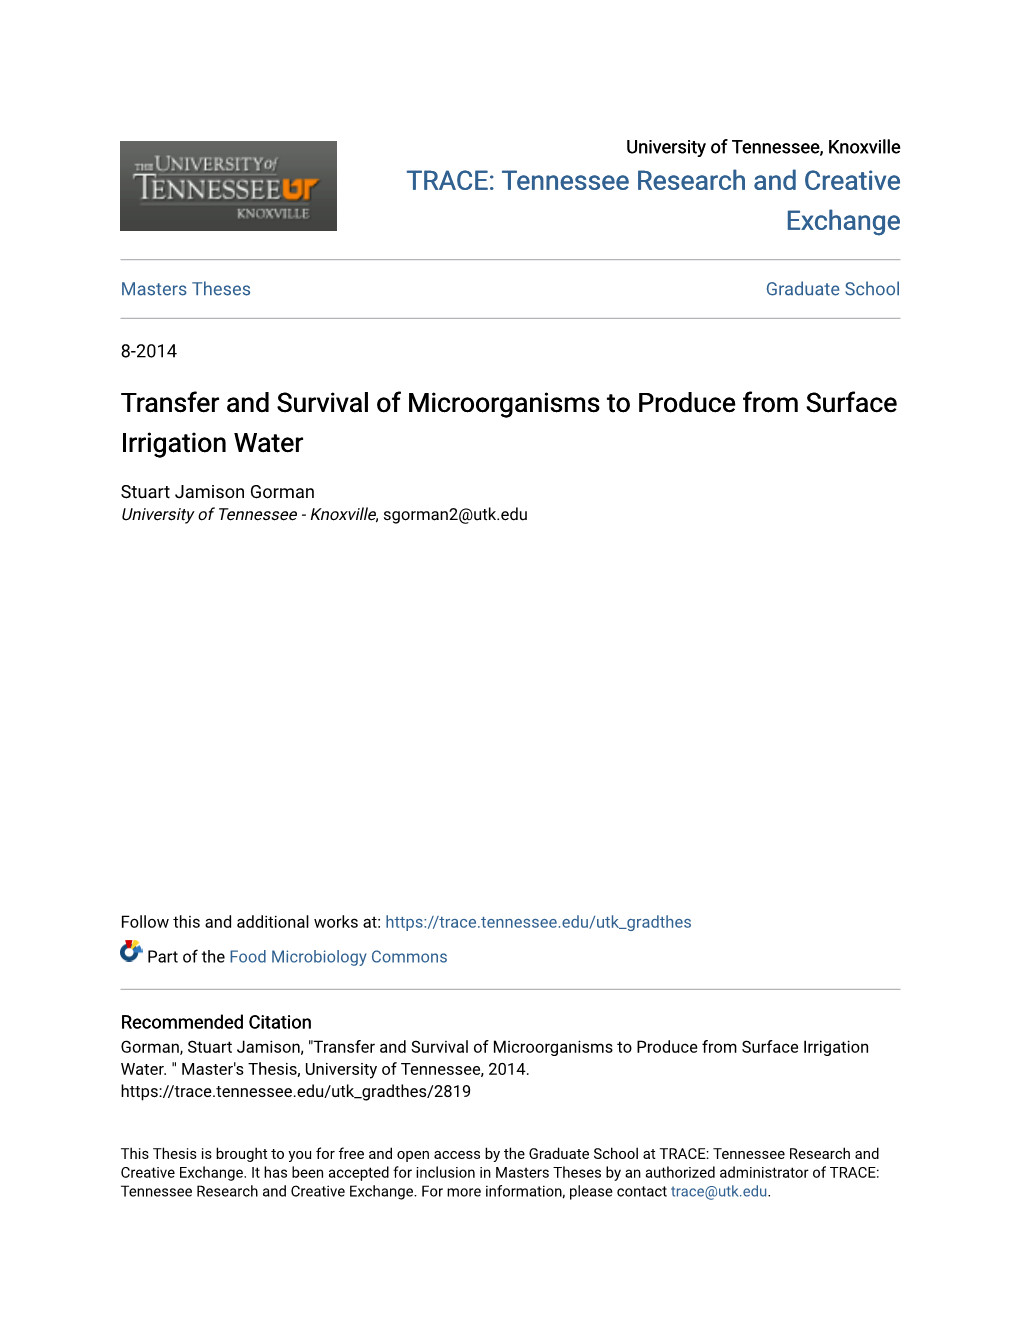 Transfer and Survival of Microorganisms to Produce from Surface Irrigation Water